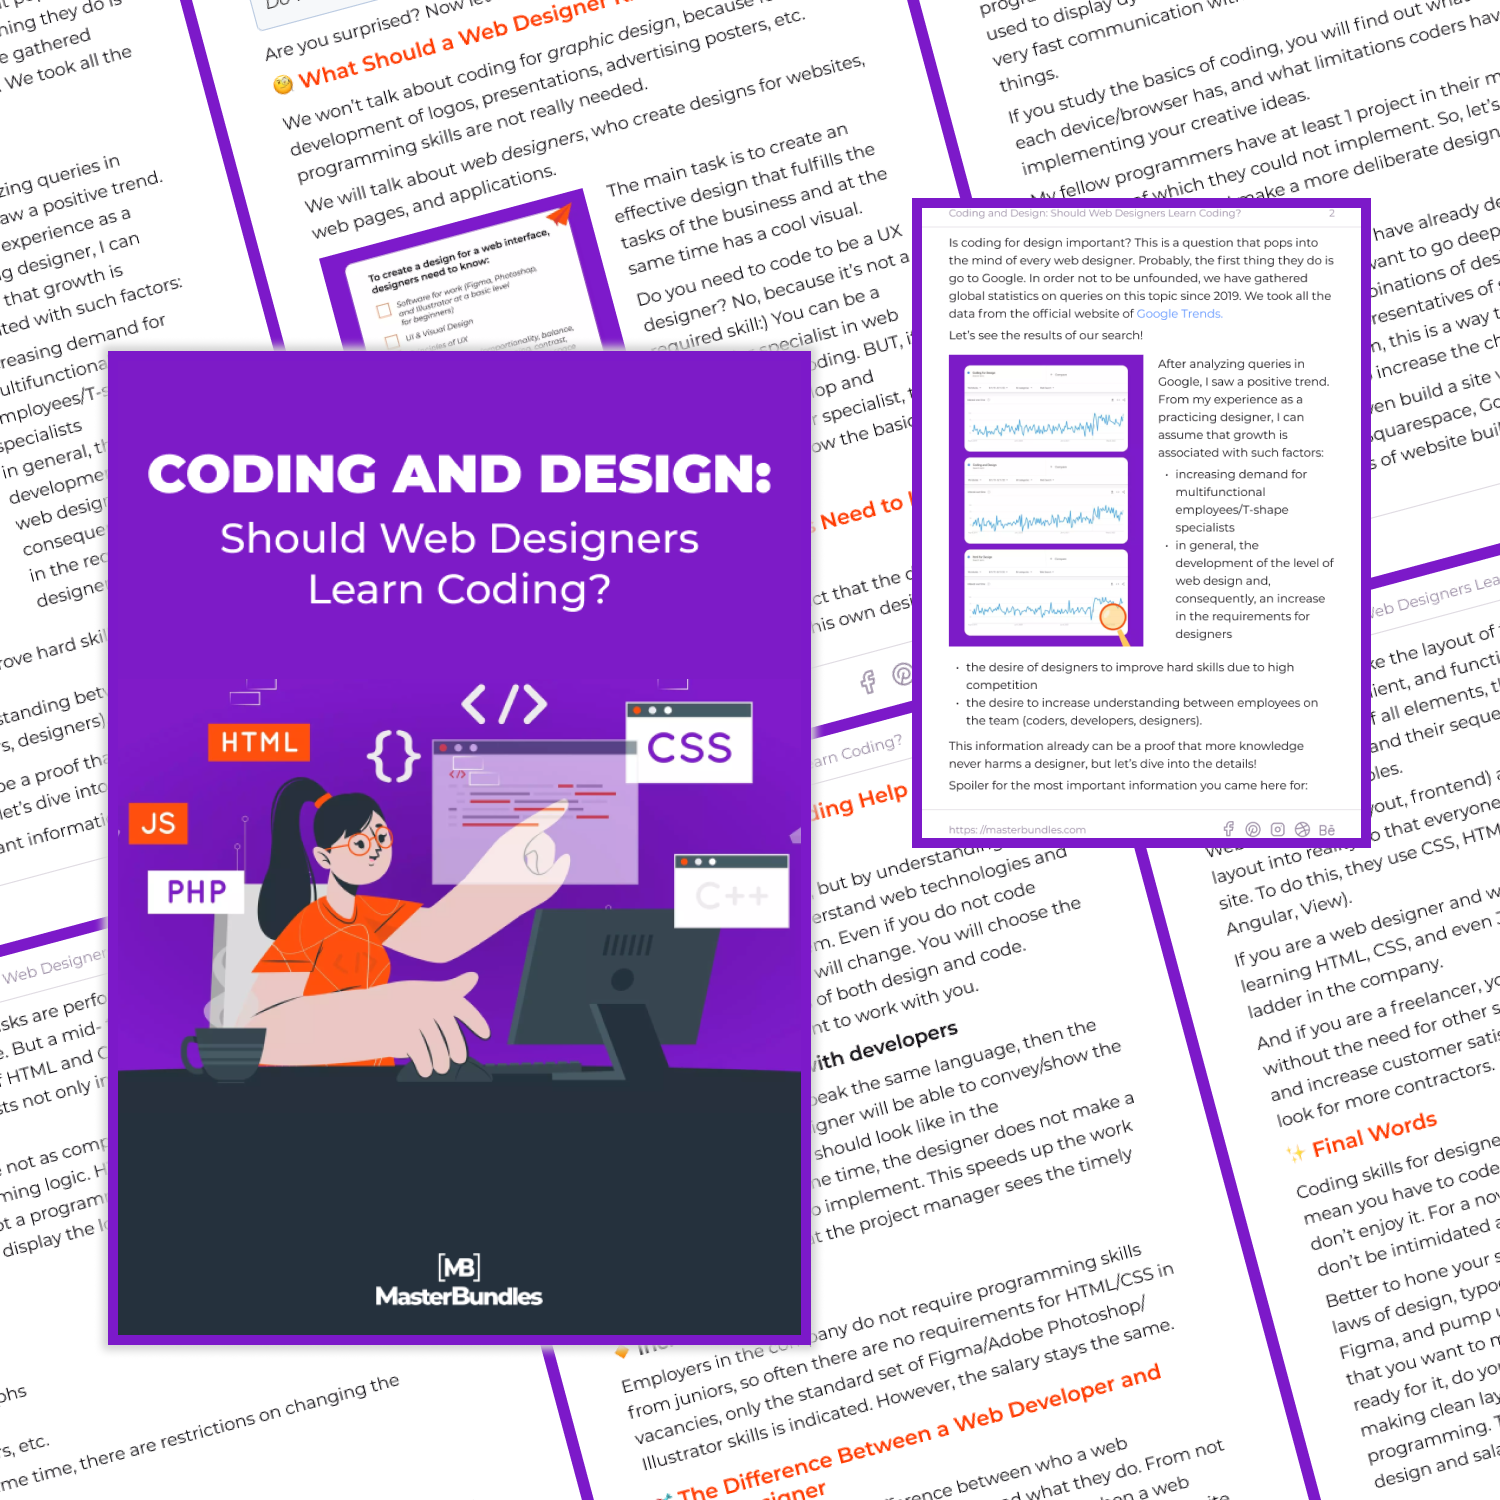 2 coding and design should web designers learn coding.